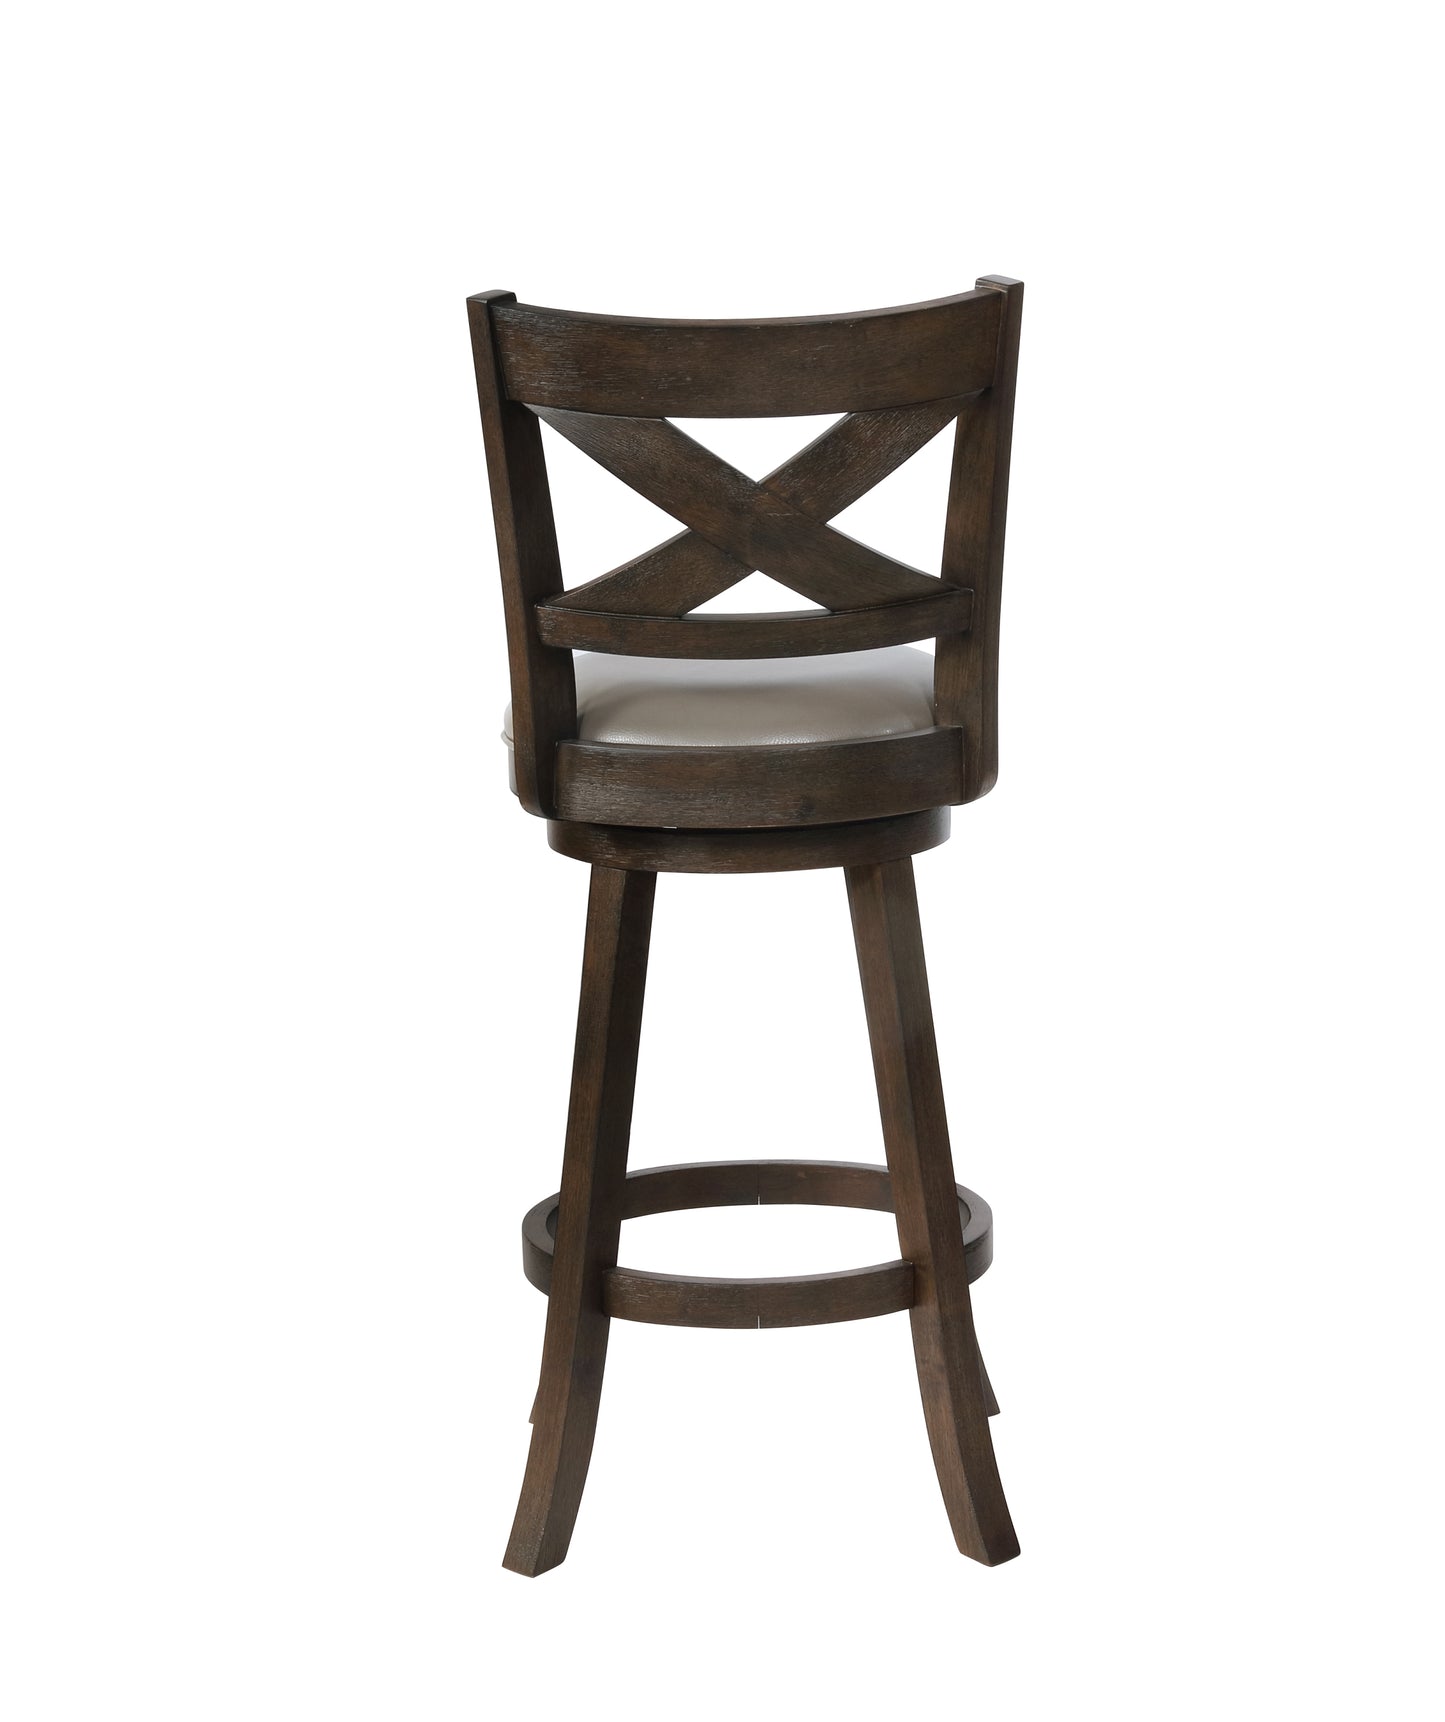 2PC Beautiful Elegant Upholstered Swivel Bar Stool for Kitchen Dining - Rustic Gray